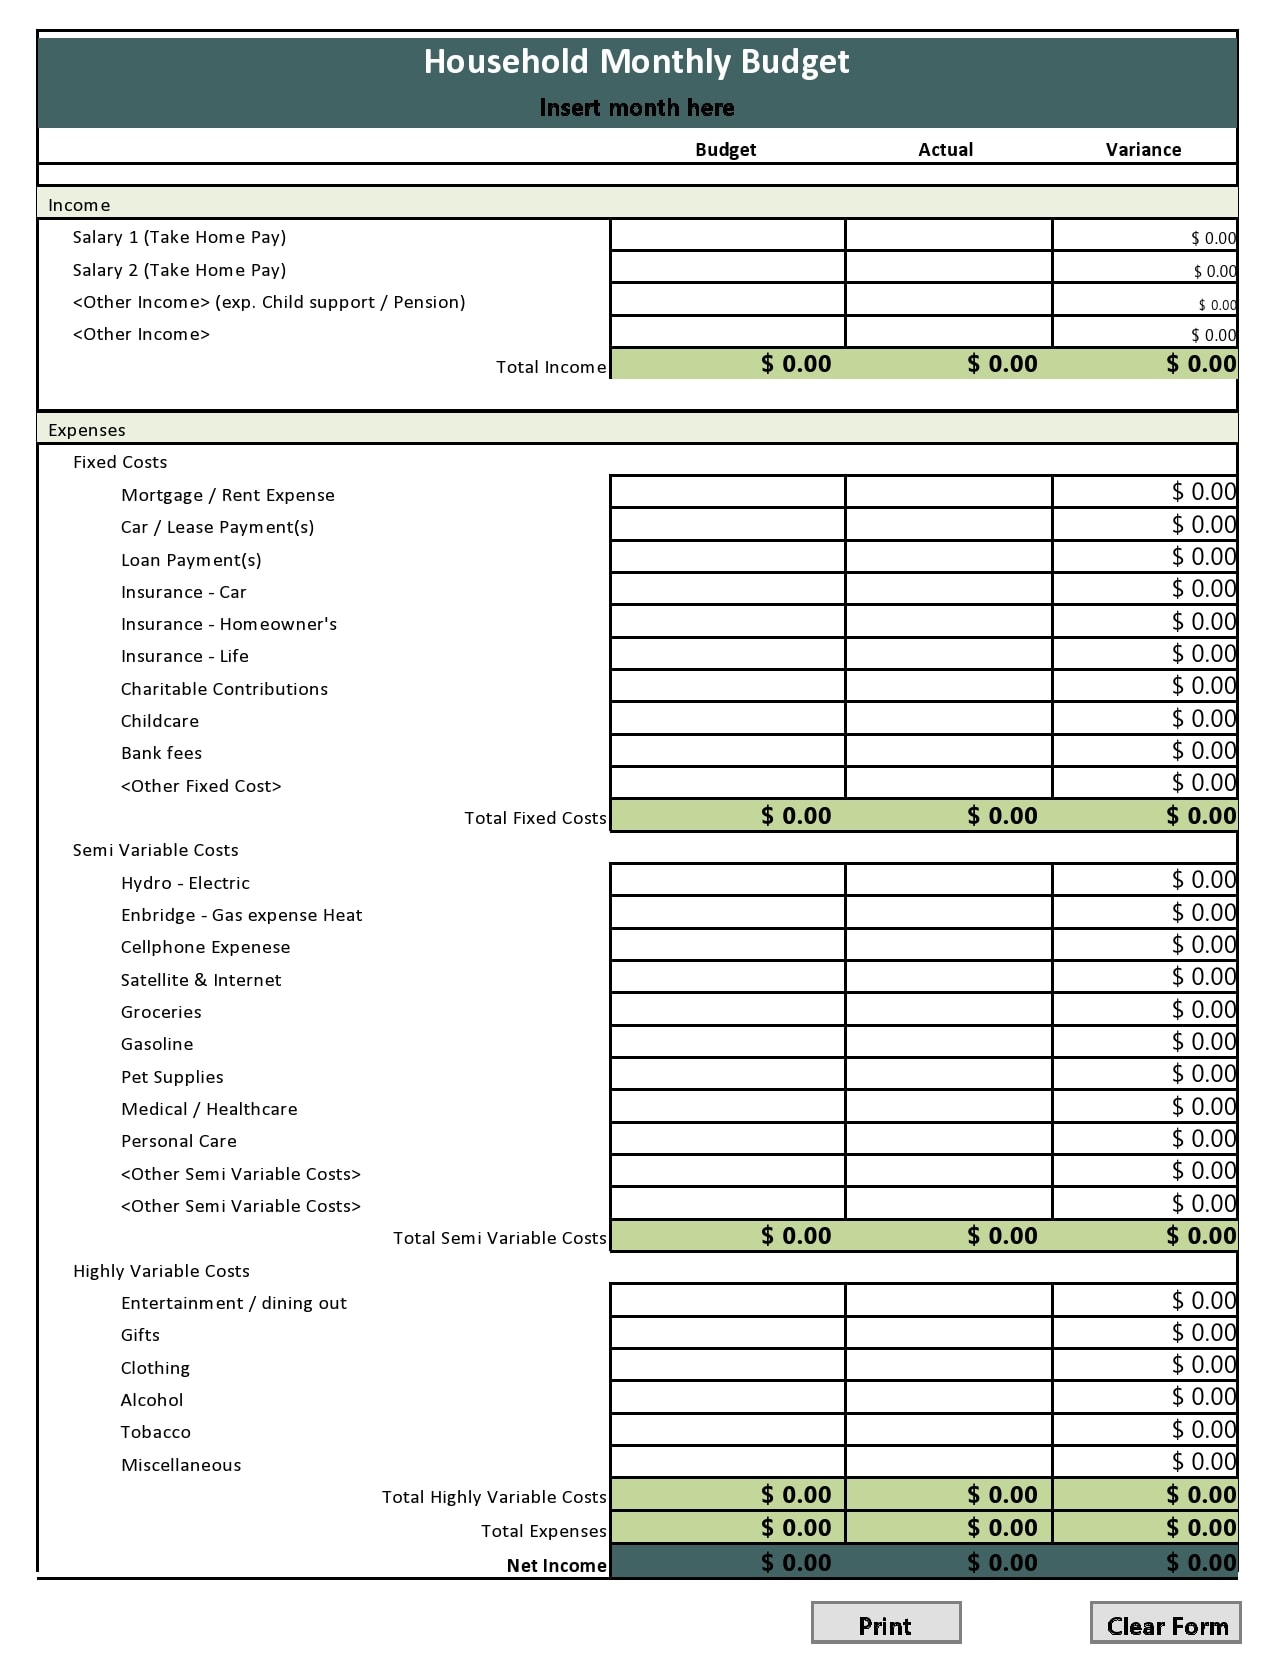 household monthly budget example